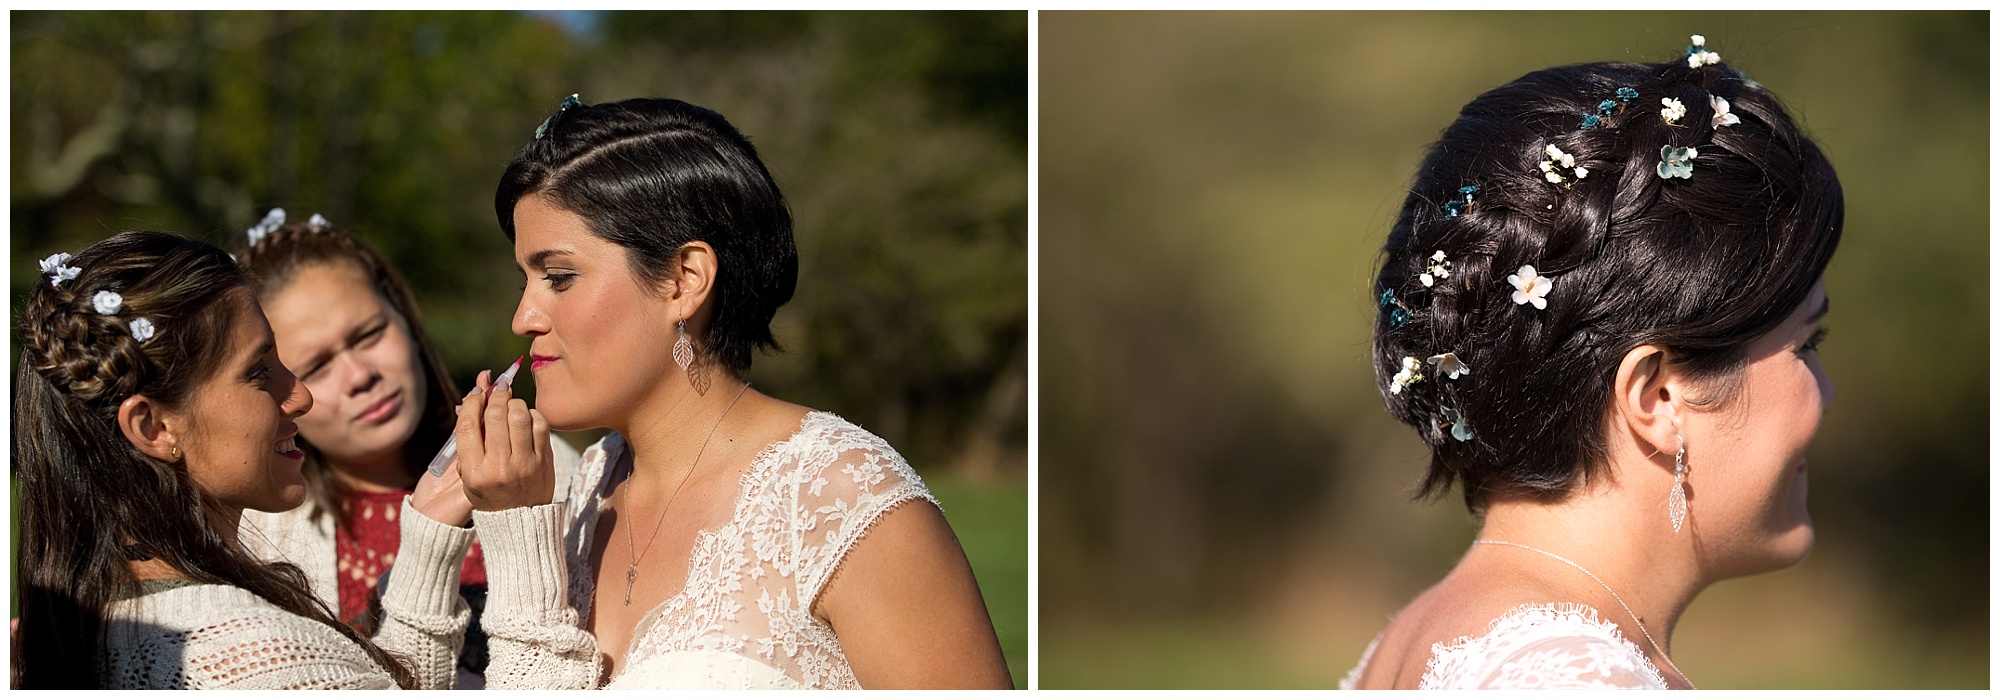 Two photos. One of the bride getting makeup touchups, the other a photo of her hair do with flowers in it.